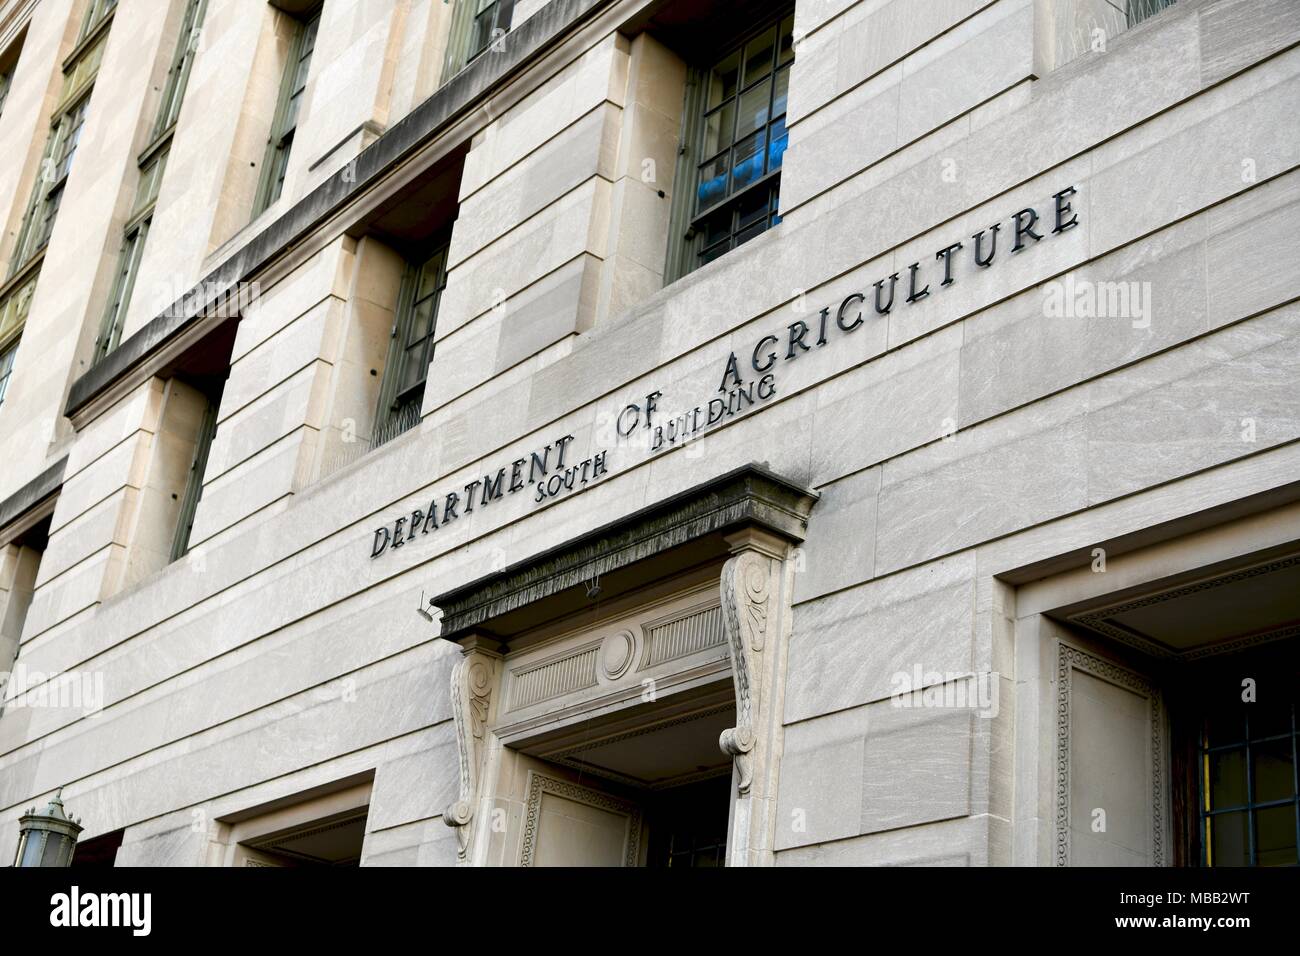 United States Department of Agriculture in Washington DC, USA Stock Photo